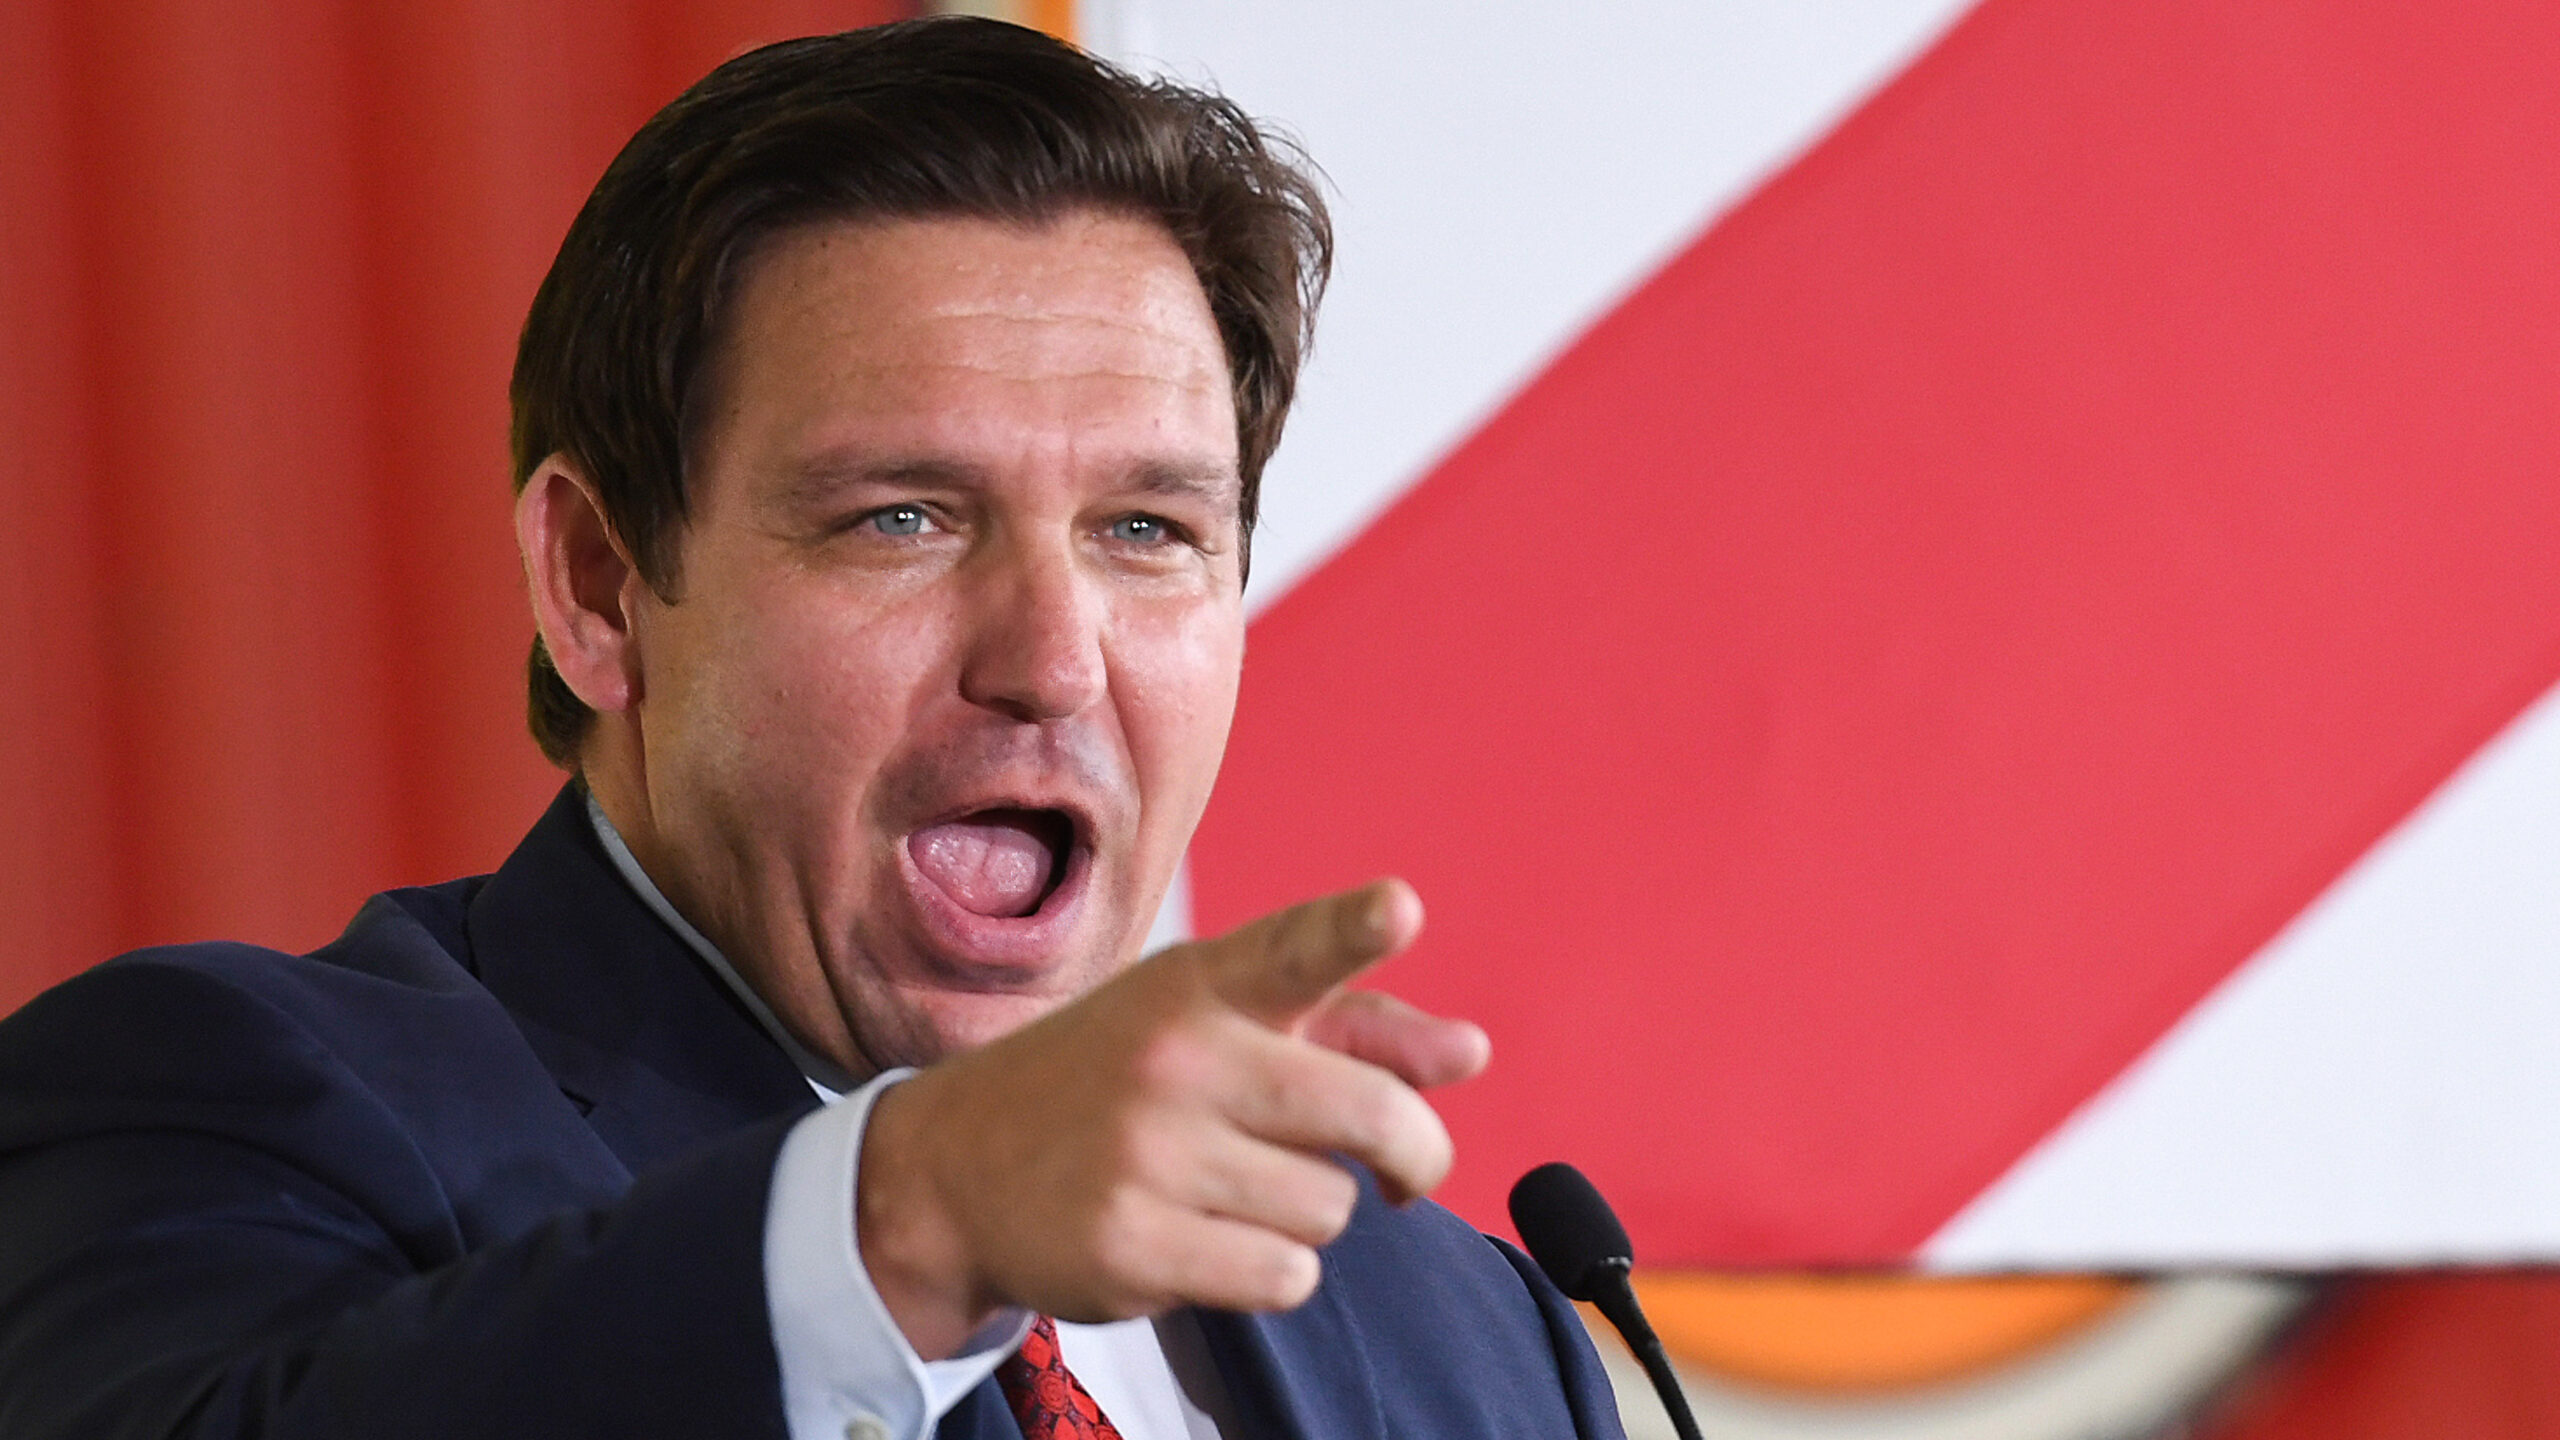 DeSantis Torches Ukraine Officials For ‘Attacking’ Elon Musk: ‘Don’t Bite The Hand That Feeds You!’